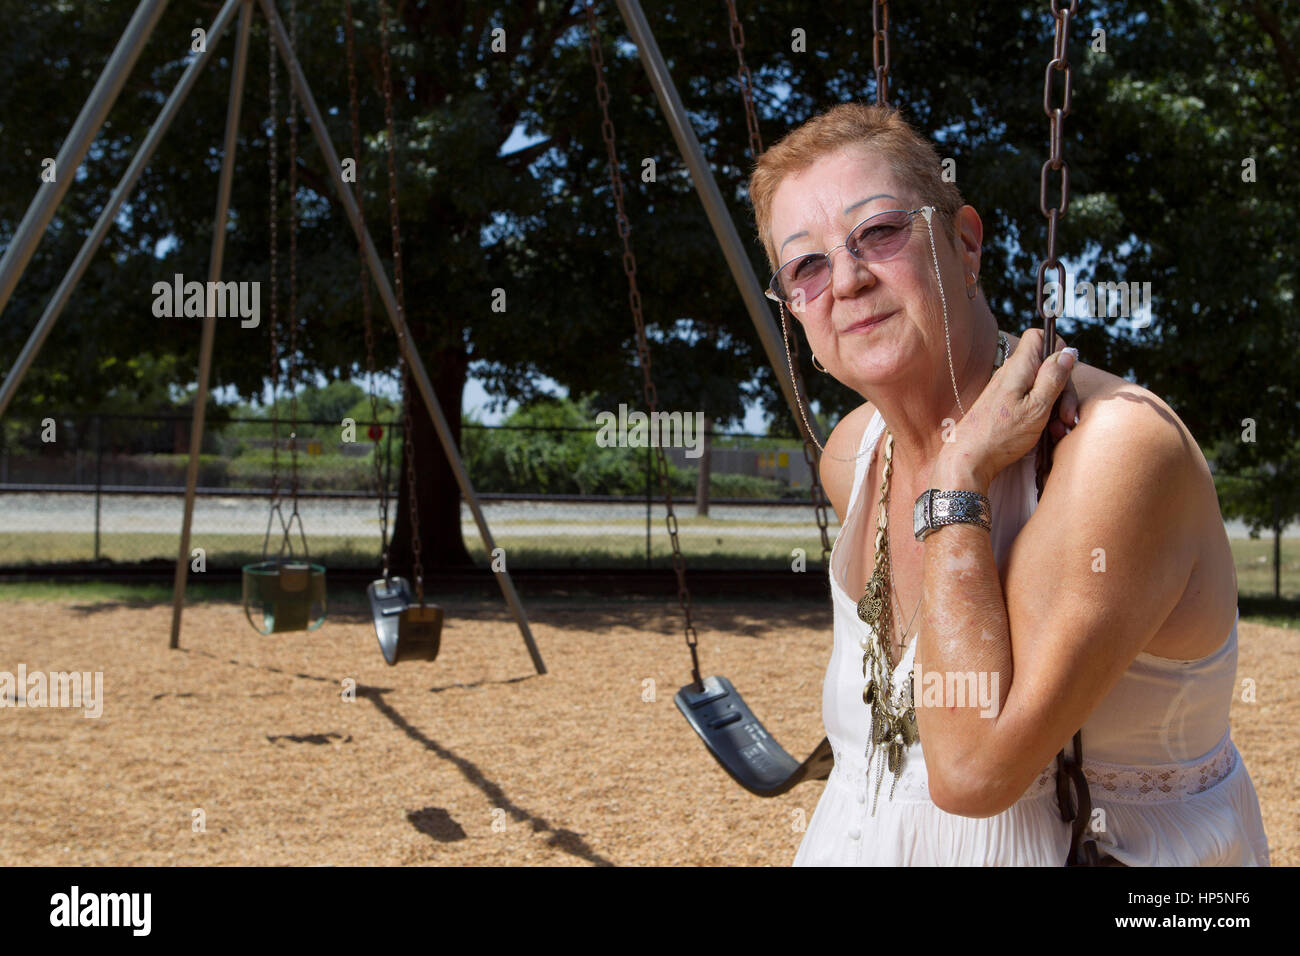 FILE Pic: Smithville, Texas, USA. July 15, 2011. Norma McCorvey, the anonymous plaintiff known as Jane Roe in the Supreme Court's landmark 1973 Roe vs. Wade ruling legalizing abortion in the United States, swings in a local park.  McCorvey died, Feb. 18, 2017 in an assisted living center in Katy, Texas Credit: Bob Daemmrich/Alamy Live News Stock Photo